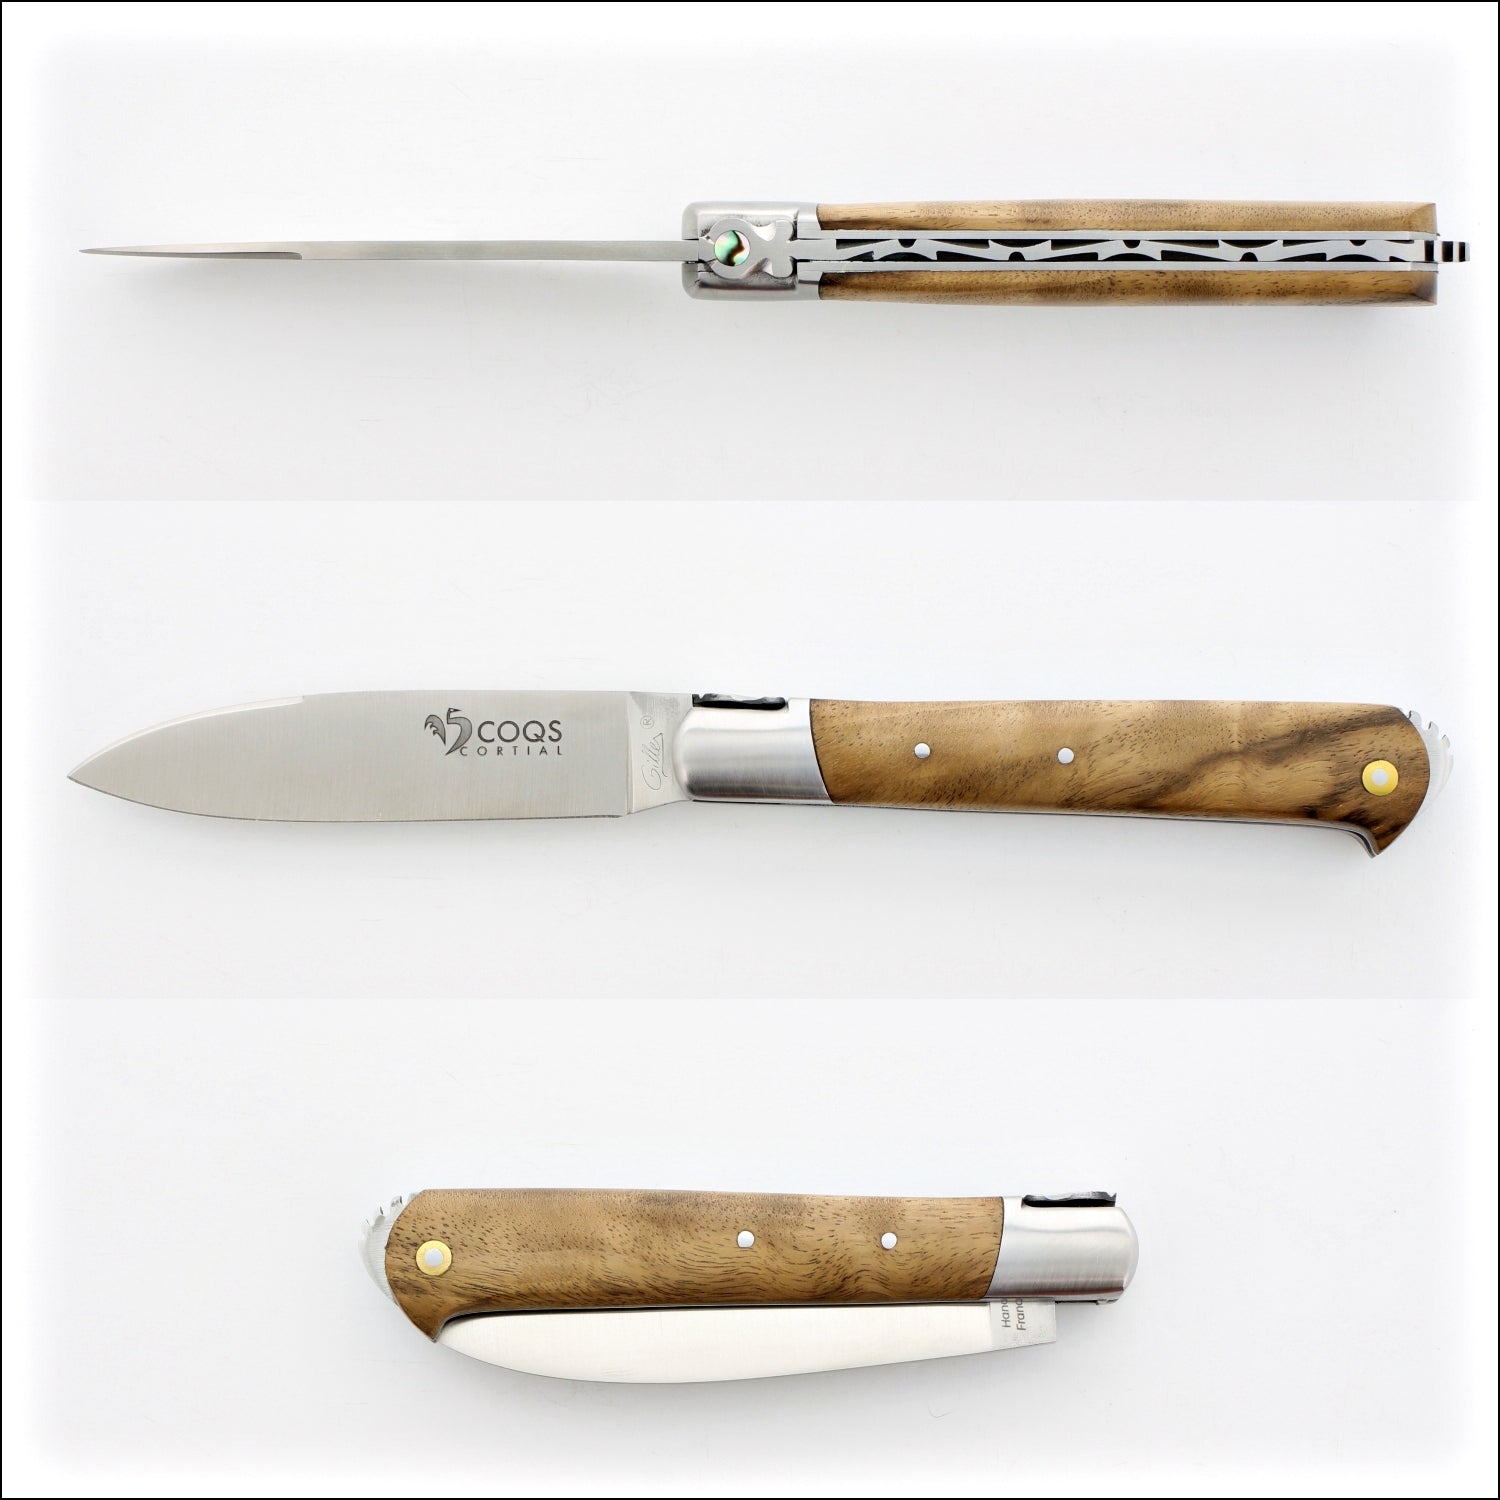 5 Coqs Pocket Knife - Walnut & Mother of Pearl Inlay